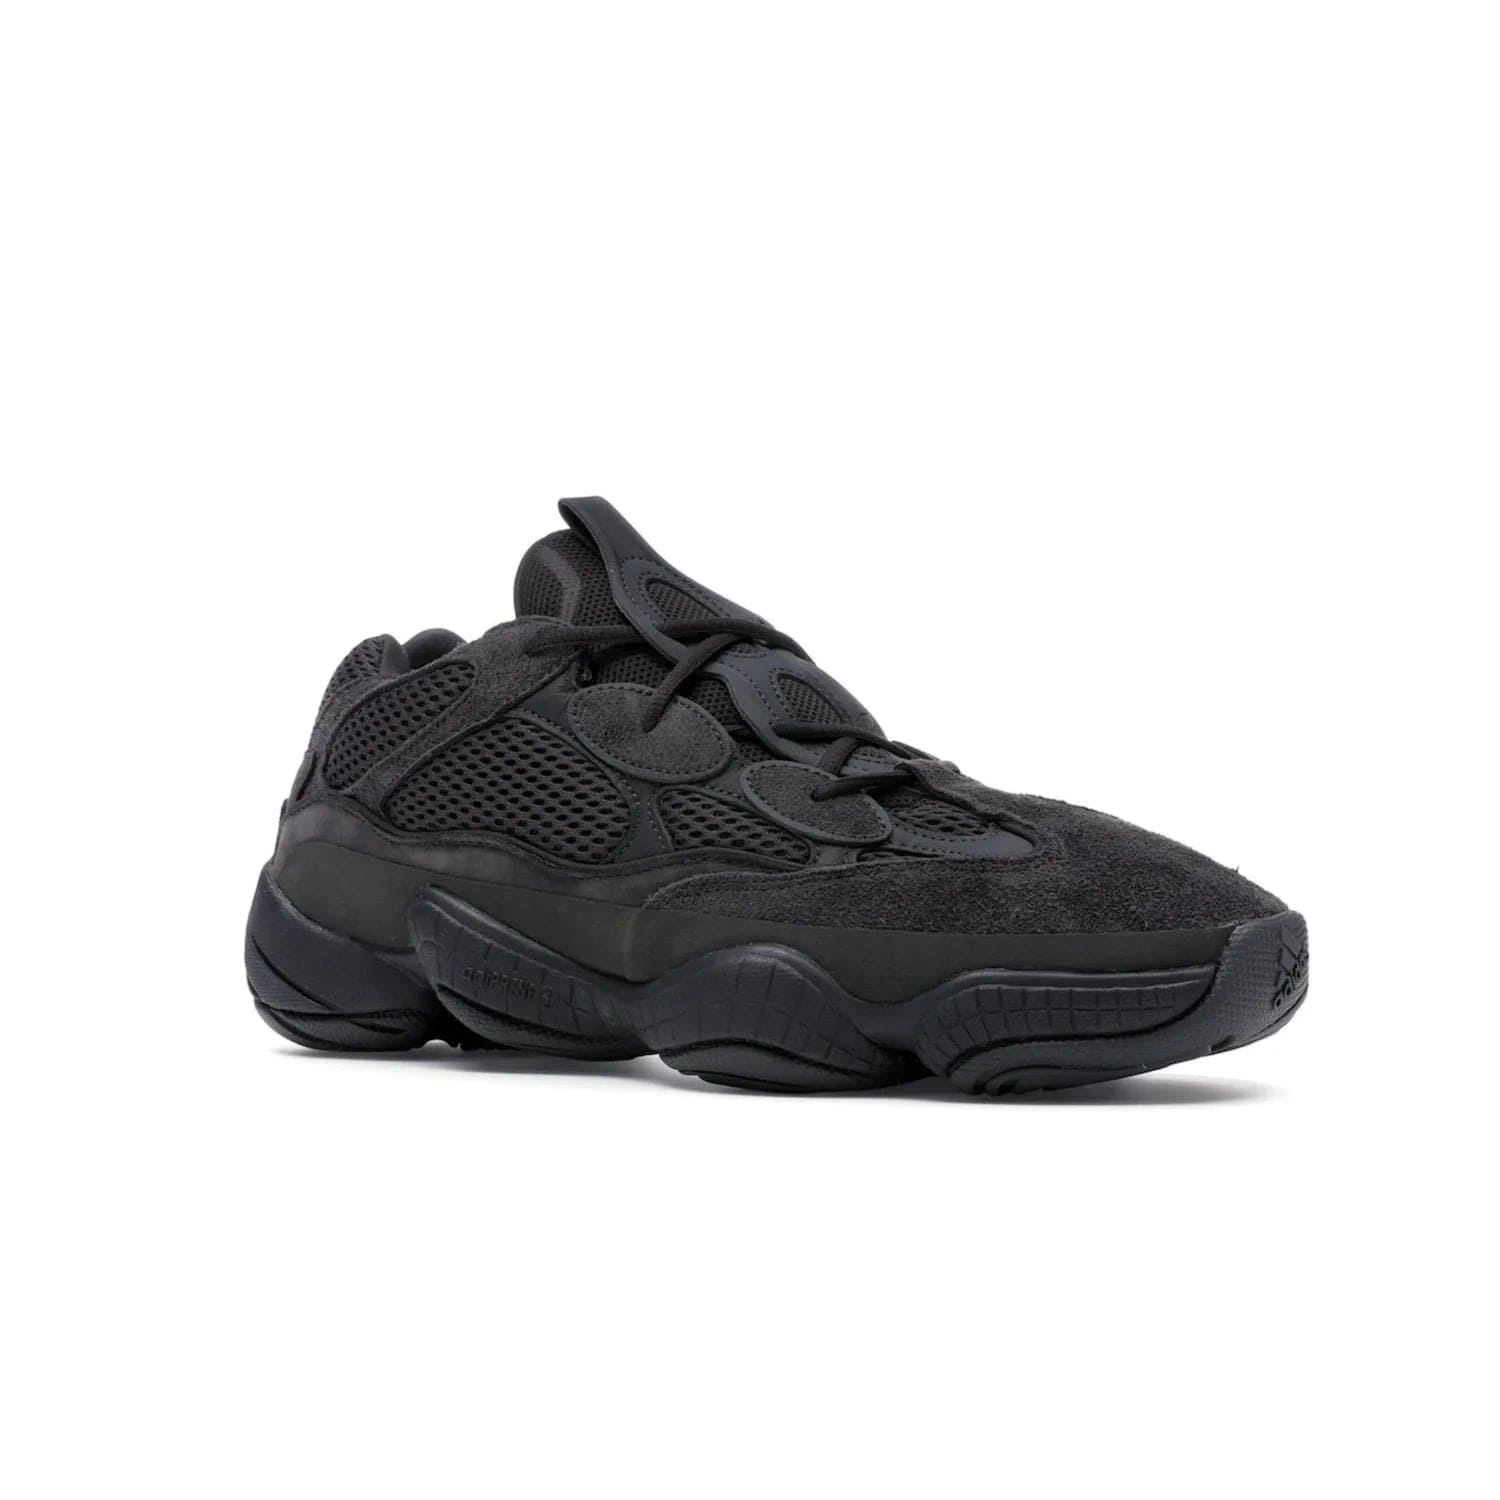 adidas Yeezy 500 Utility Black - Image 5 - Only at www.BallersClubKickz.com - Iconic adidas Yeezy 500 Utility Black in All-Black colorway. Durable black mesh and suede upper with adiPRENE® sole delivers comfort and support. Be unstoppable with the Yeezy 500 Utility Black. Released July 2018.